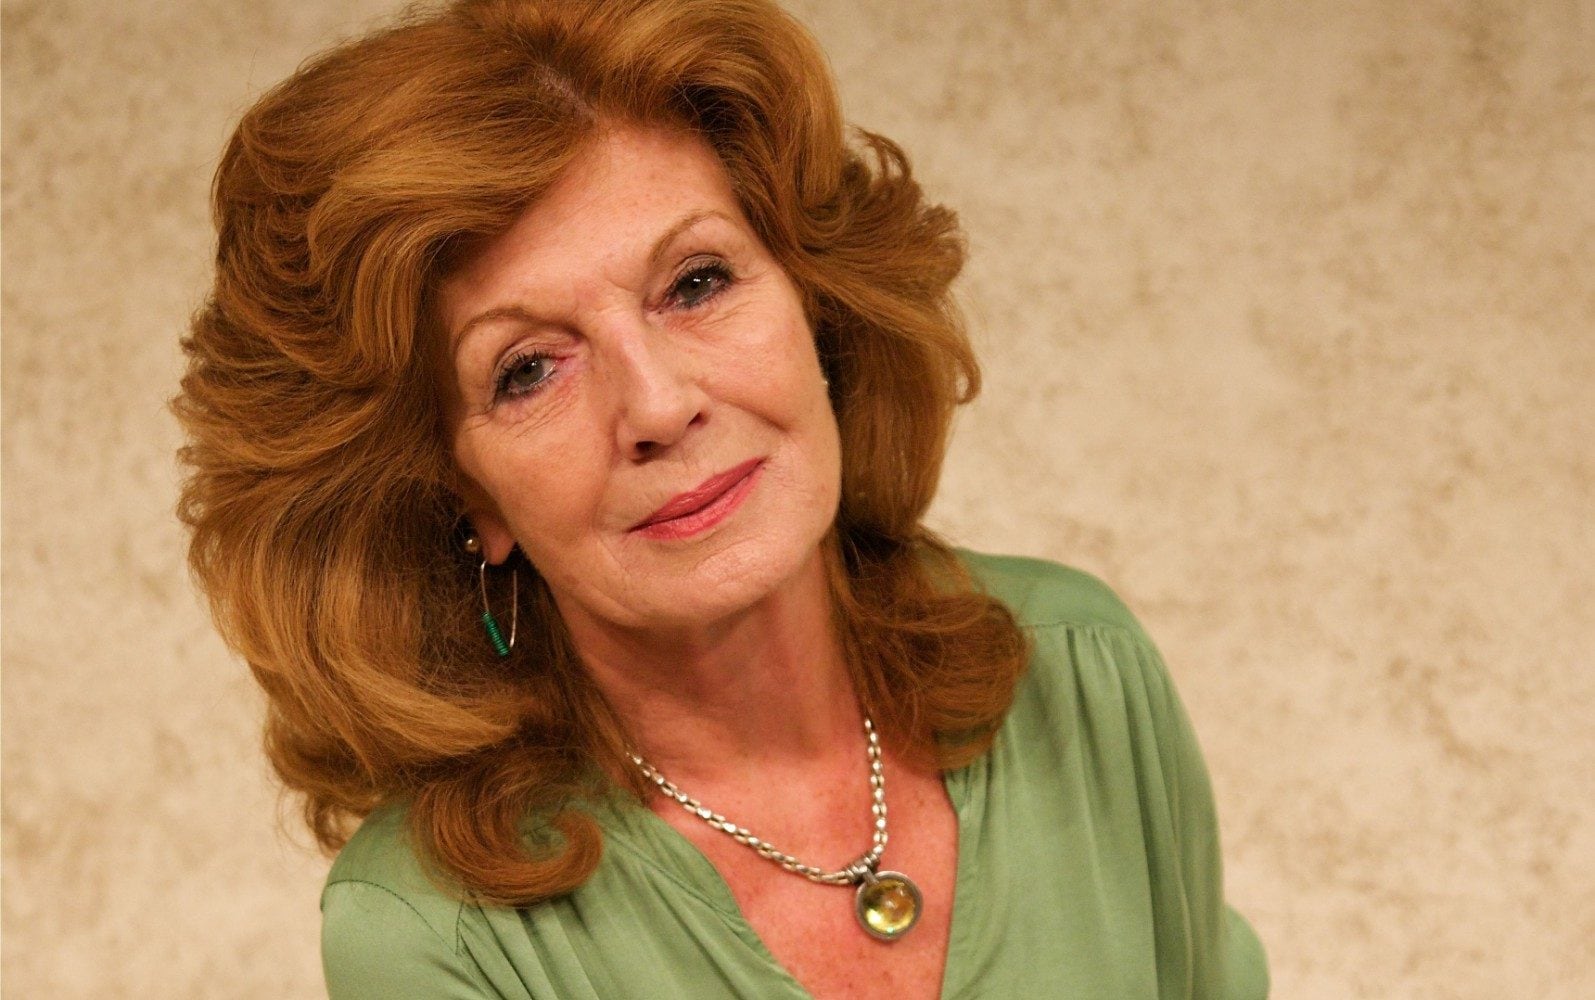 Rula Lenska Biography: Age, Net Worth, Photos, Husband, Wiki, Movies and TV Shows, Instagram, Children, Height